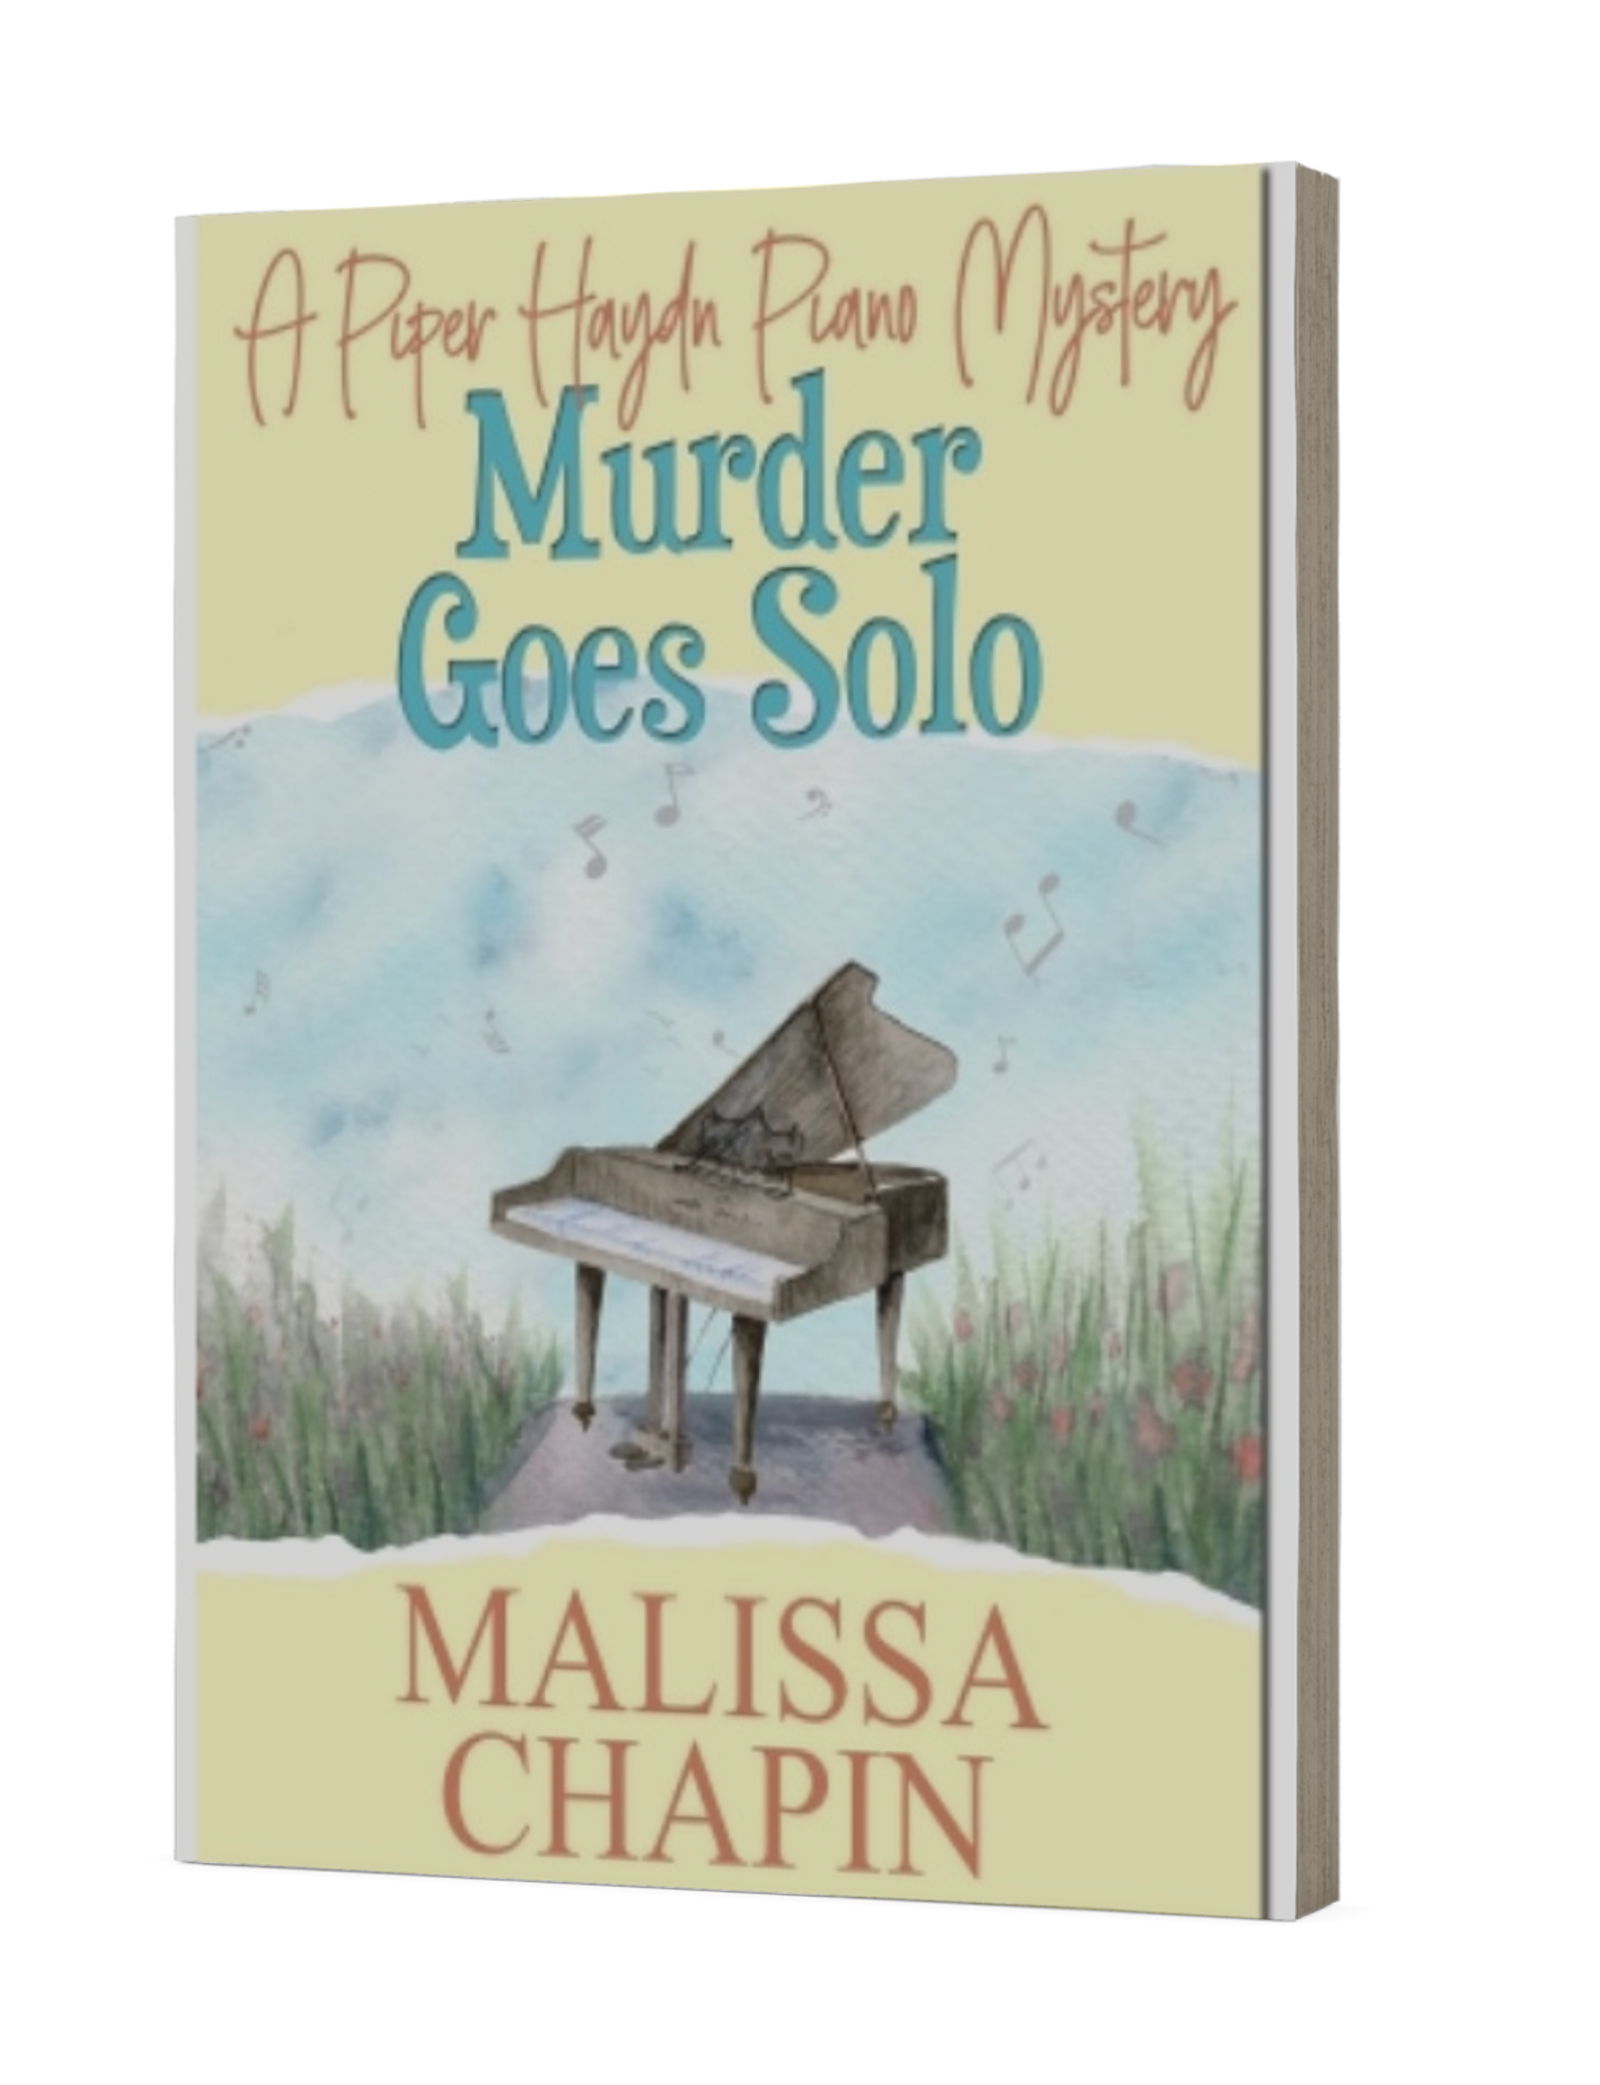 Murder Goes Solo: A Piper Haydn Piano Mystery Cozy Musician Mystery  Book 1 amateur sleuth woman detective quirky sidekick Wisconsin story twisty mystery